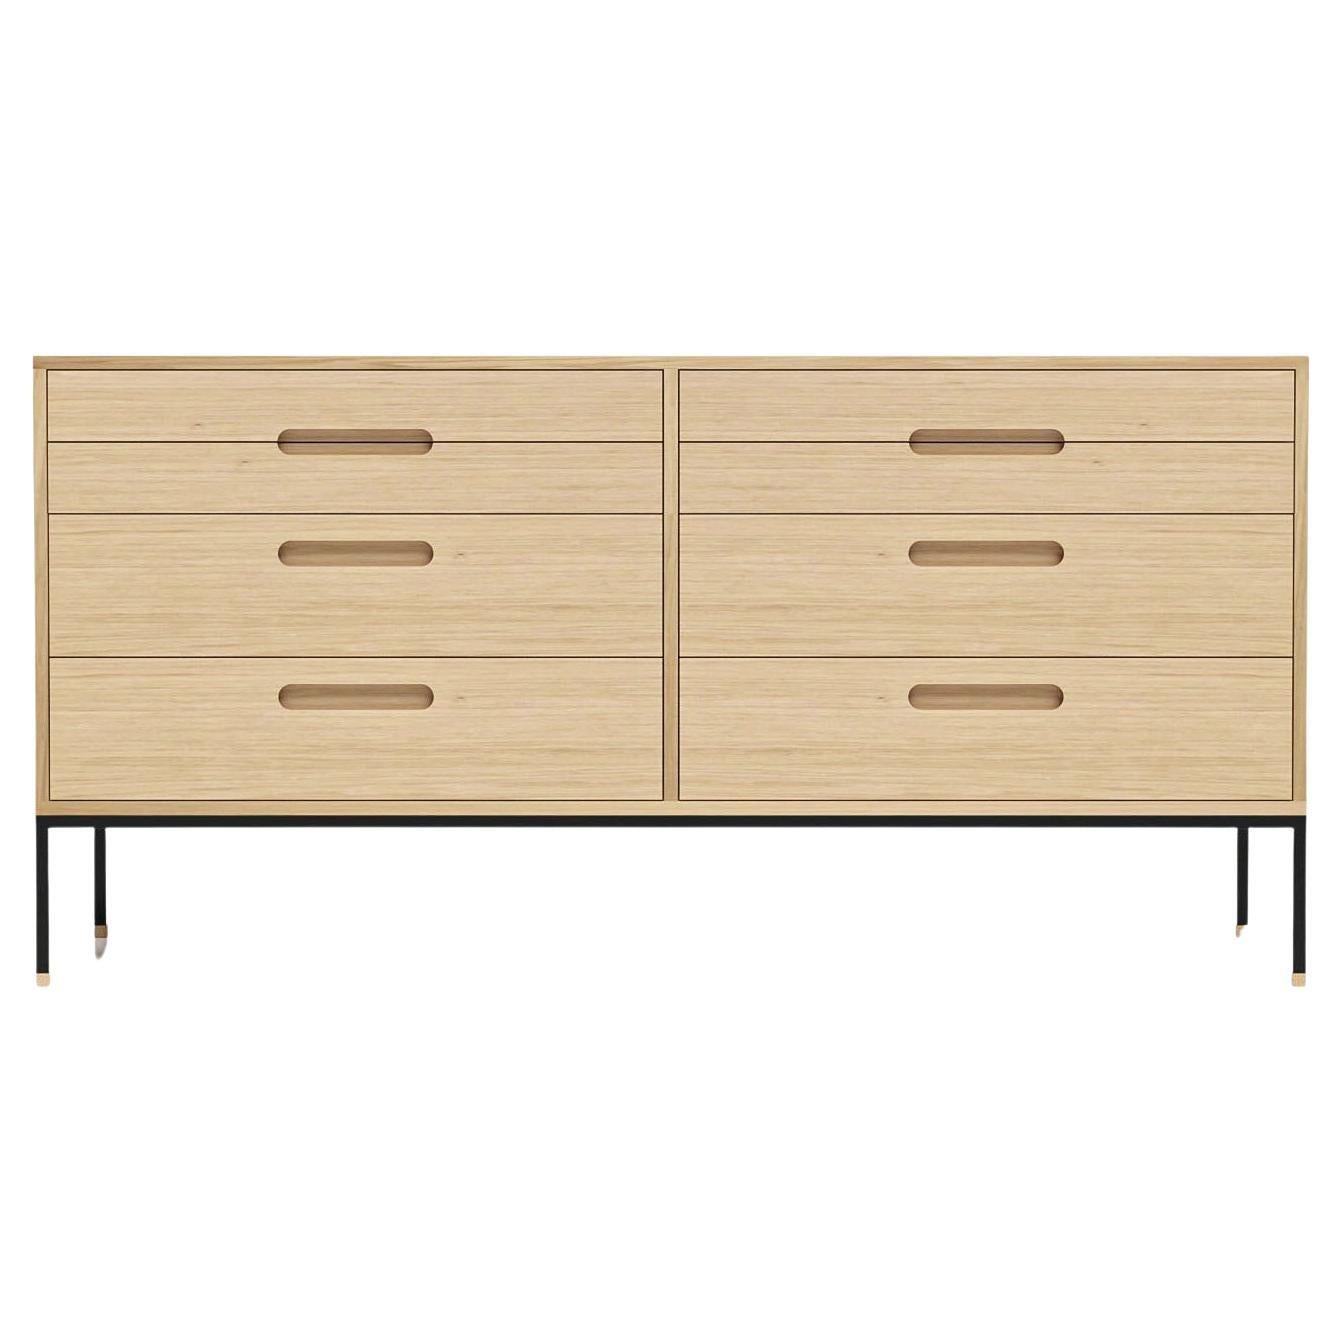 Chest of drawers model Cosmopol. 8 drawers